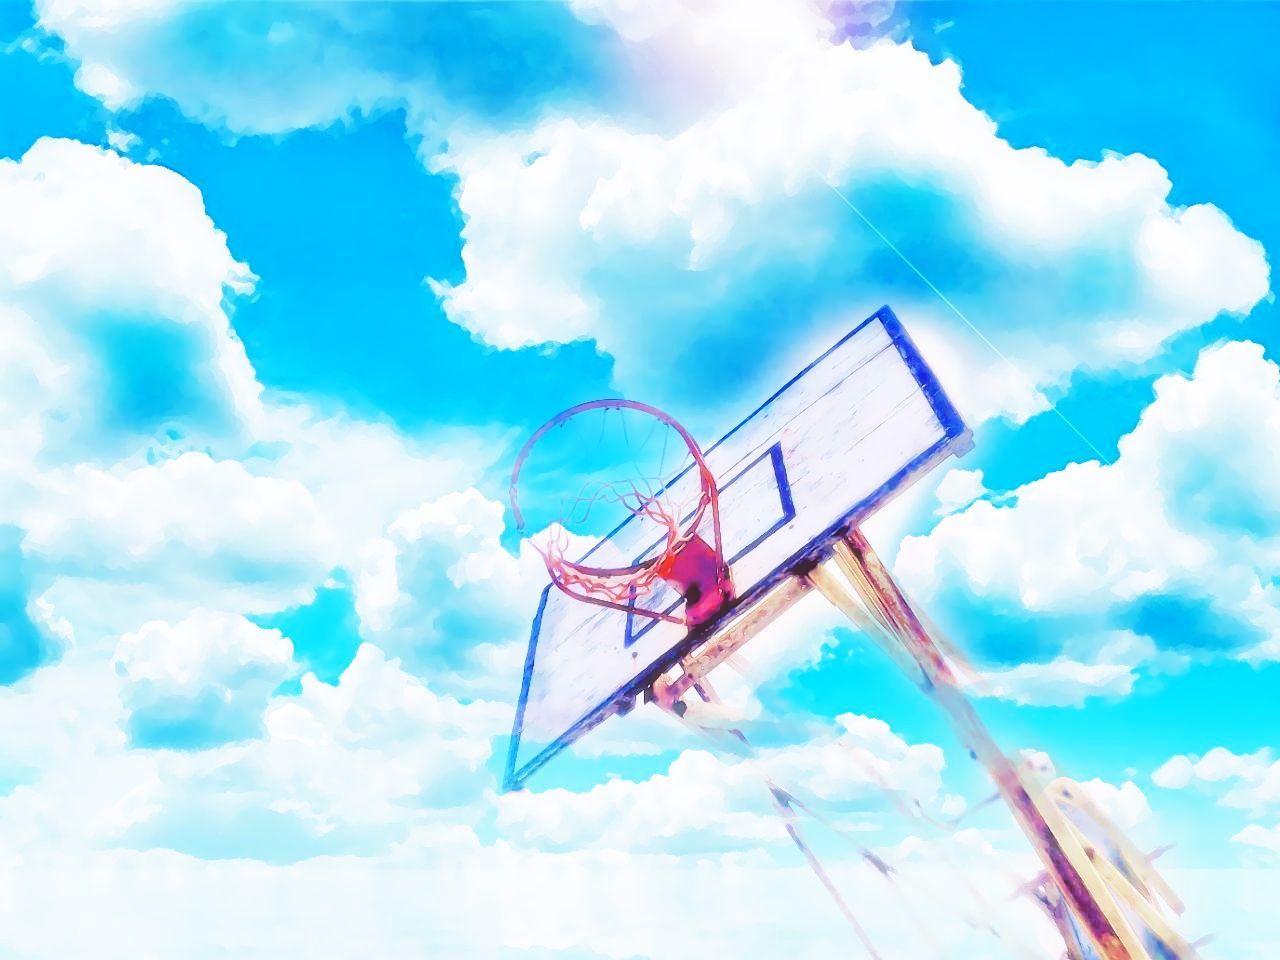 cloud - sky, sky, basketball - sport, low angle view, basketball hoop, day, nature, sport, outdoors, no people, blue, sunlight, metal, communication, ball, cloudscape, leisure games, arts culture and entertainment, motion, leisure activity